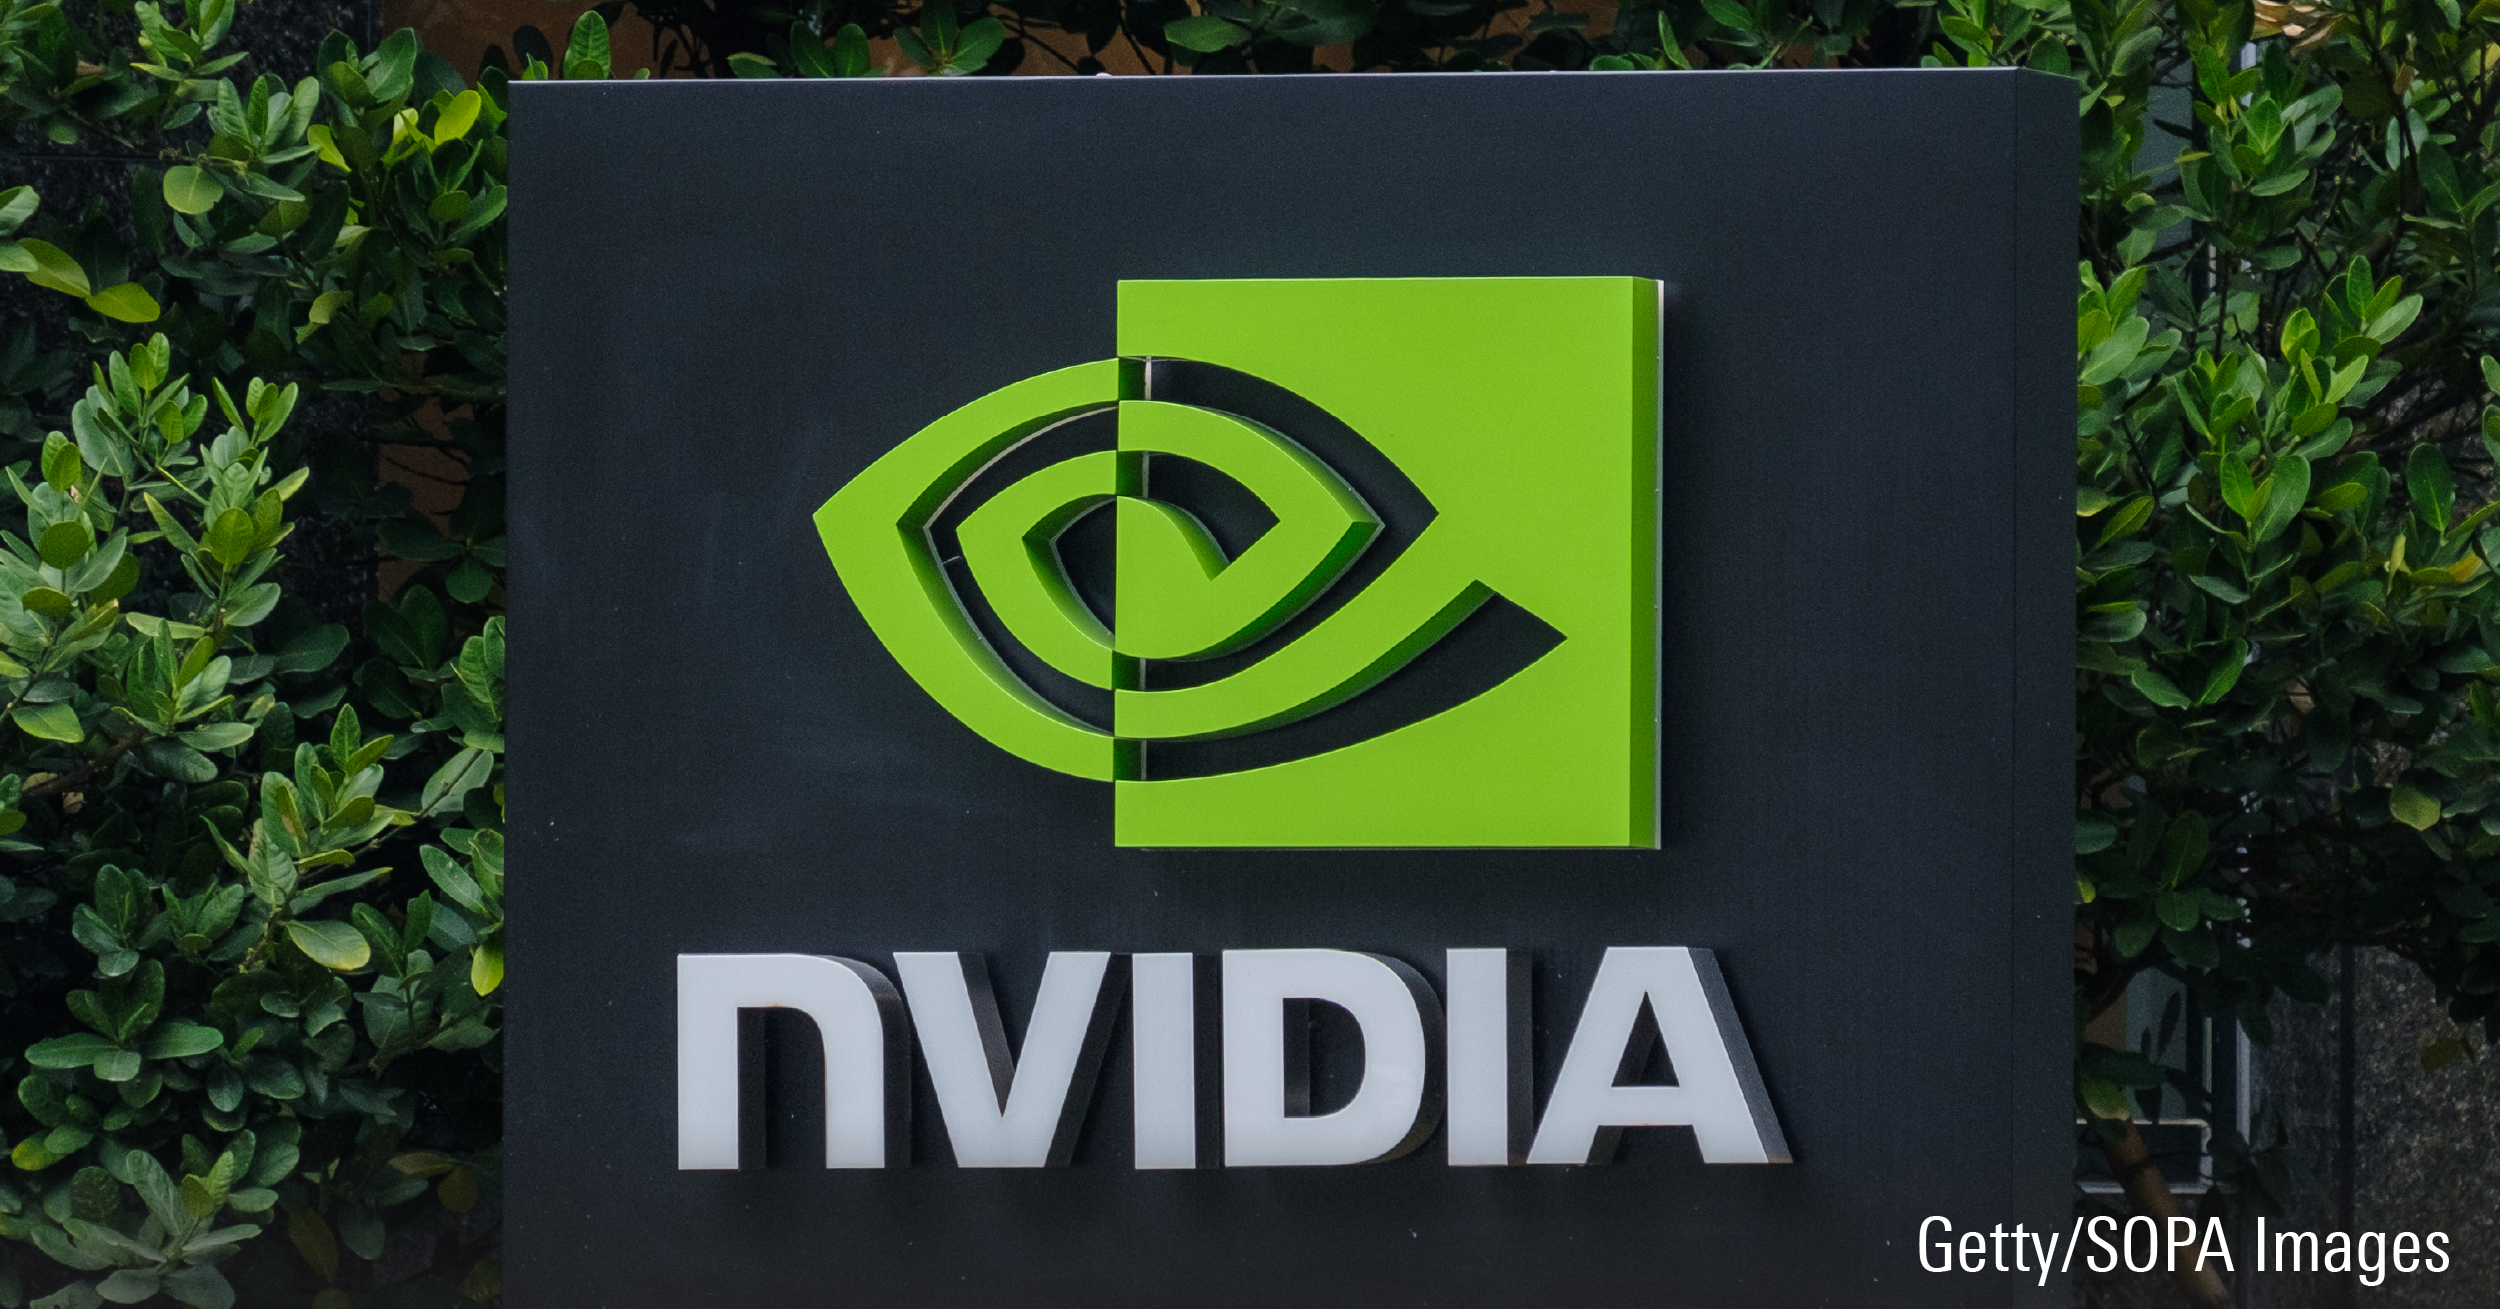 2021/03/30: American multinational technology company incorporated in Delaware, Nvidia logo seen in Taipei.